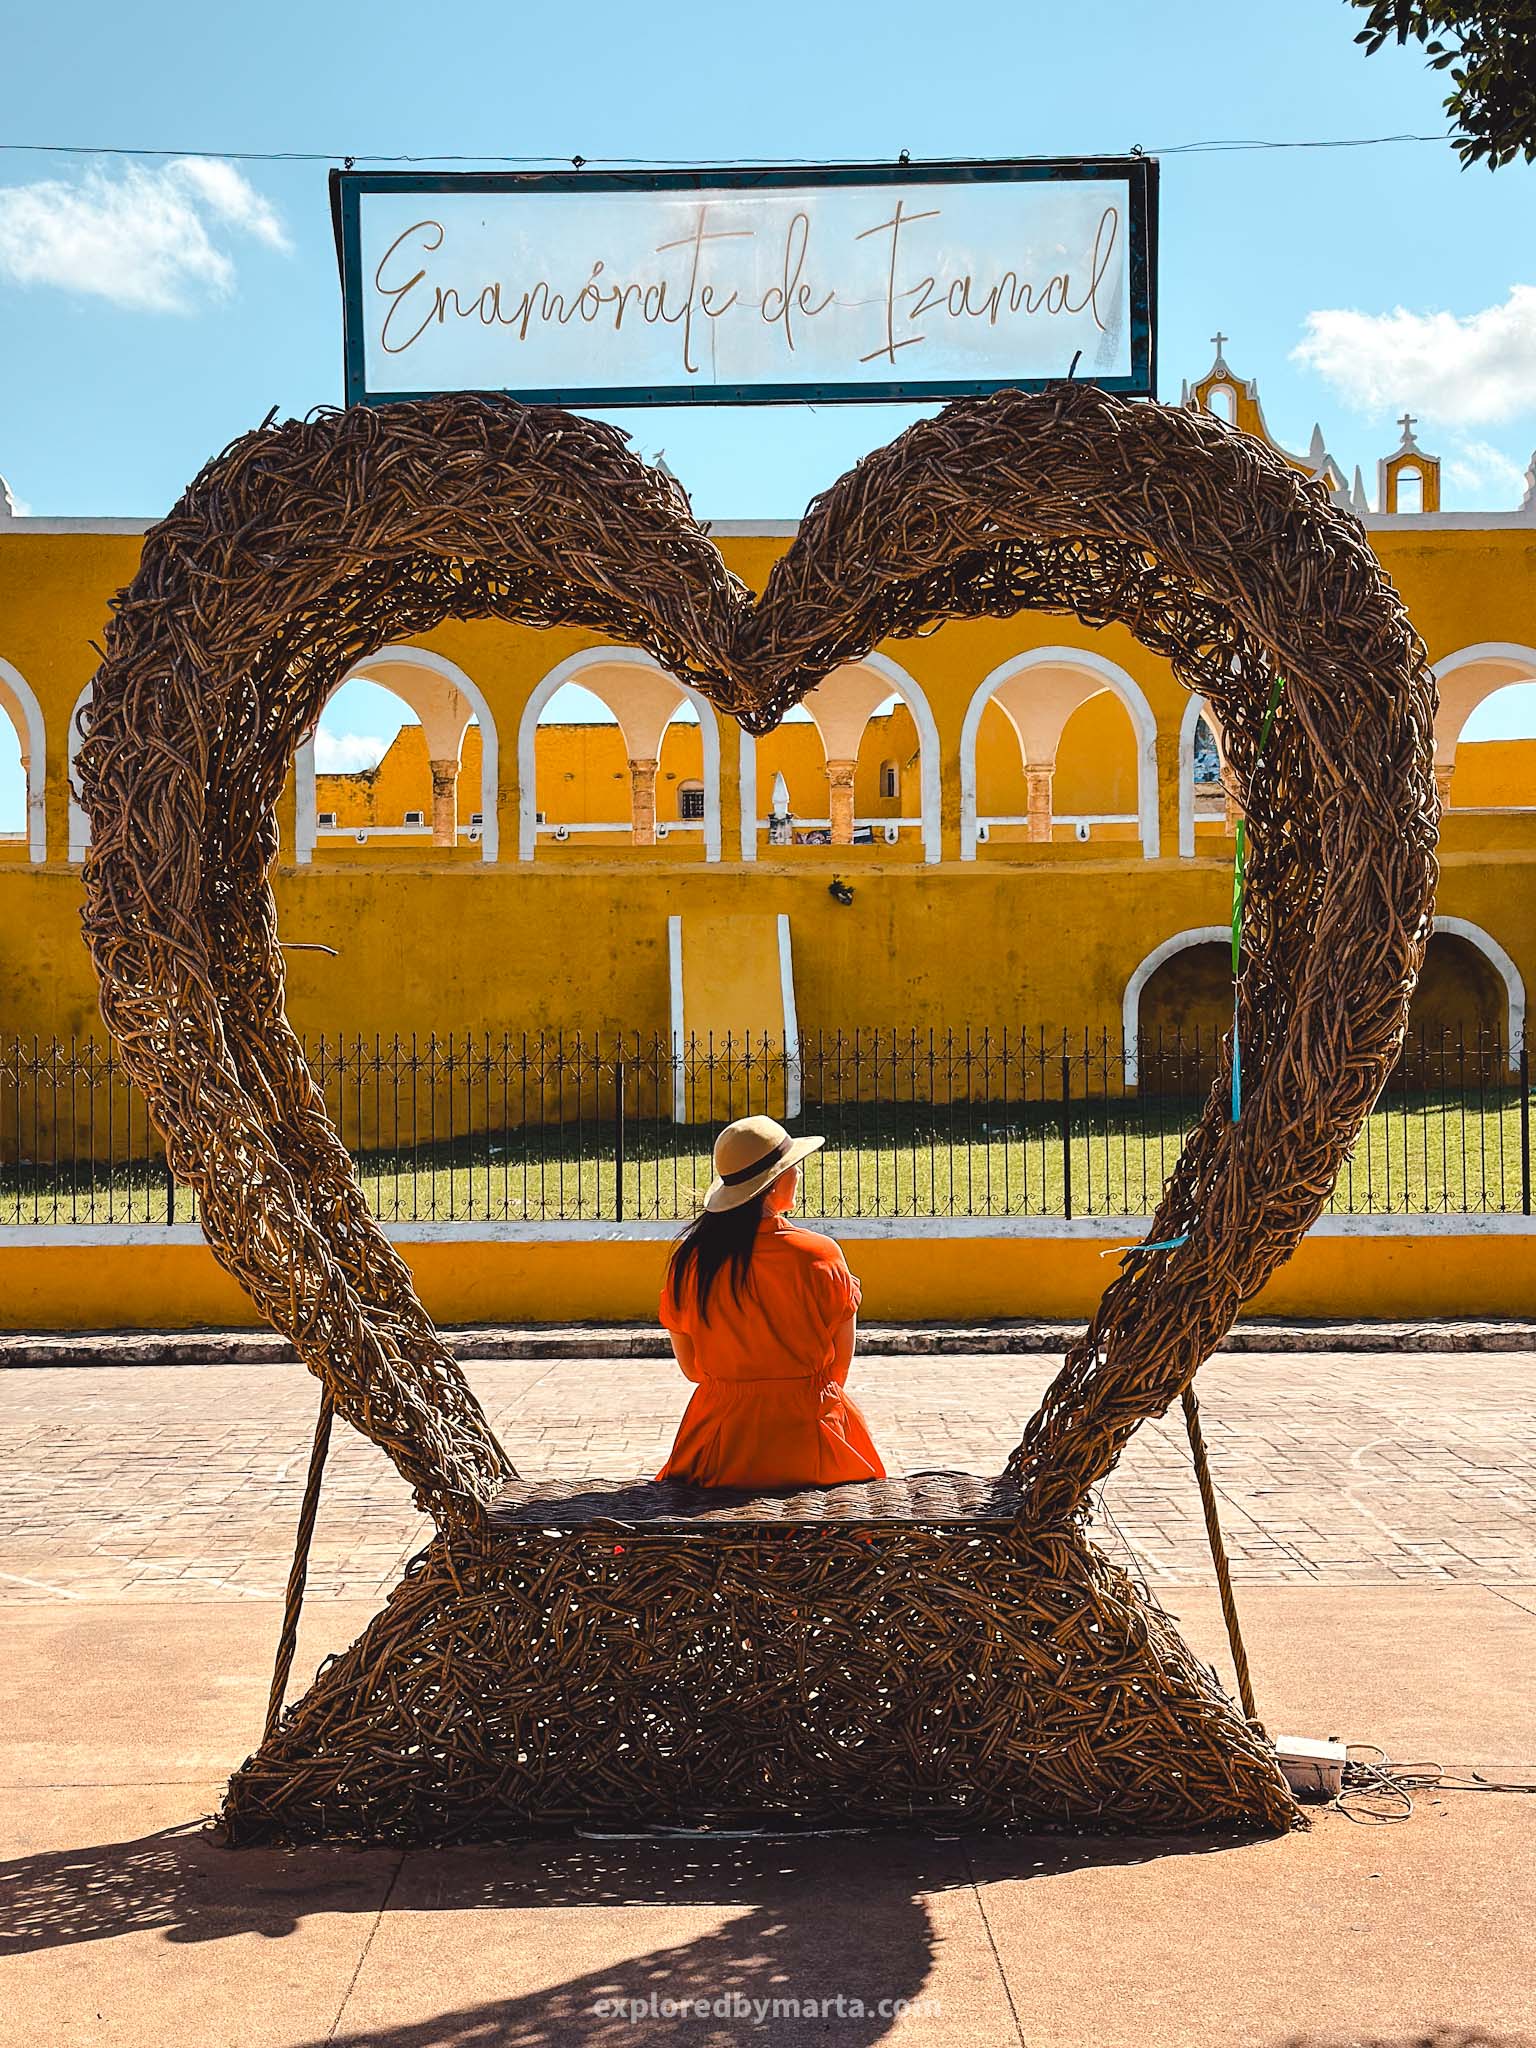 Izamal, Mexico-5 de Mayo Park in the center of Izamal is a place to relax and observe panoramic views of the yellow San Antonio de Padua convent